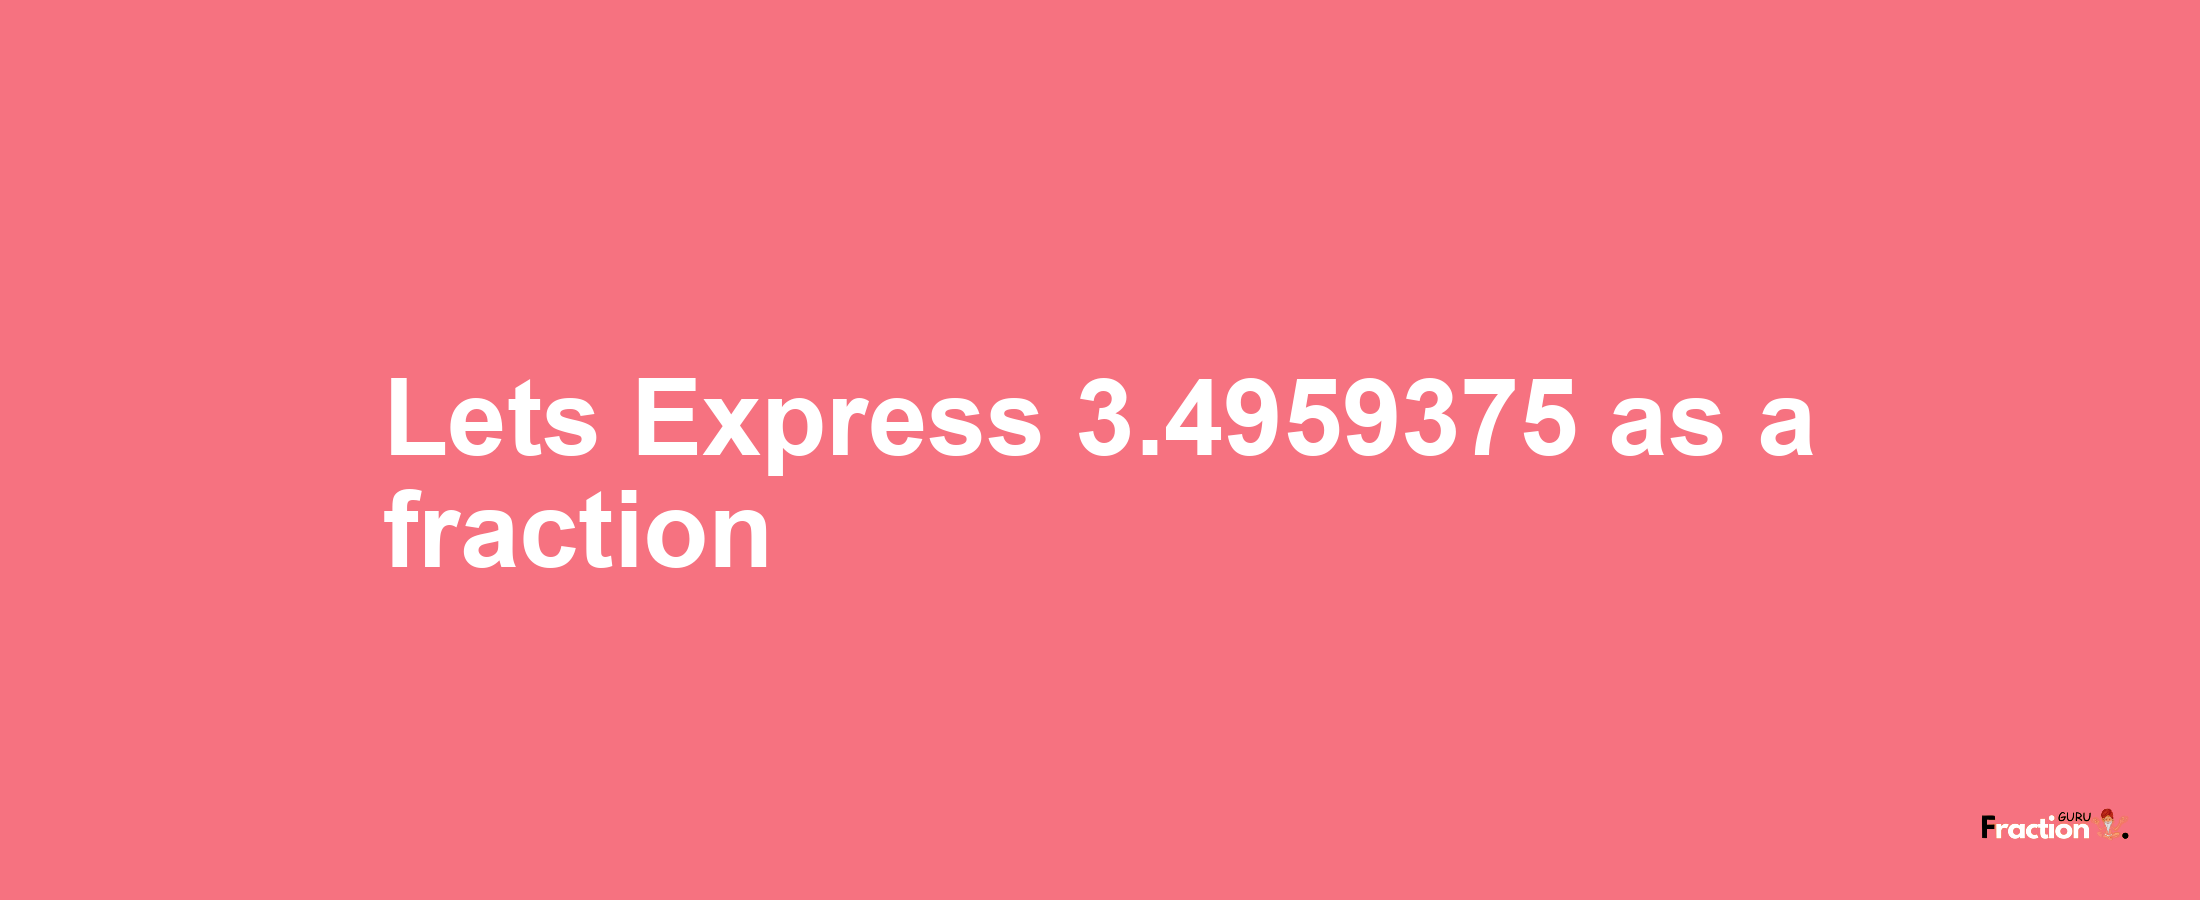 Lets Express 3.4959375 as afraction